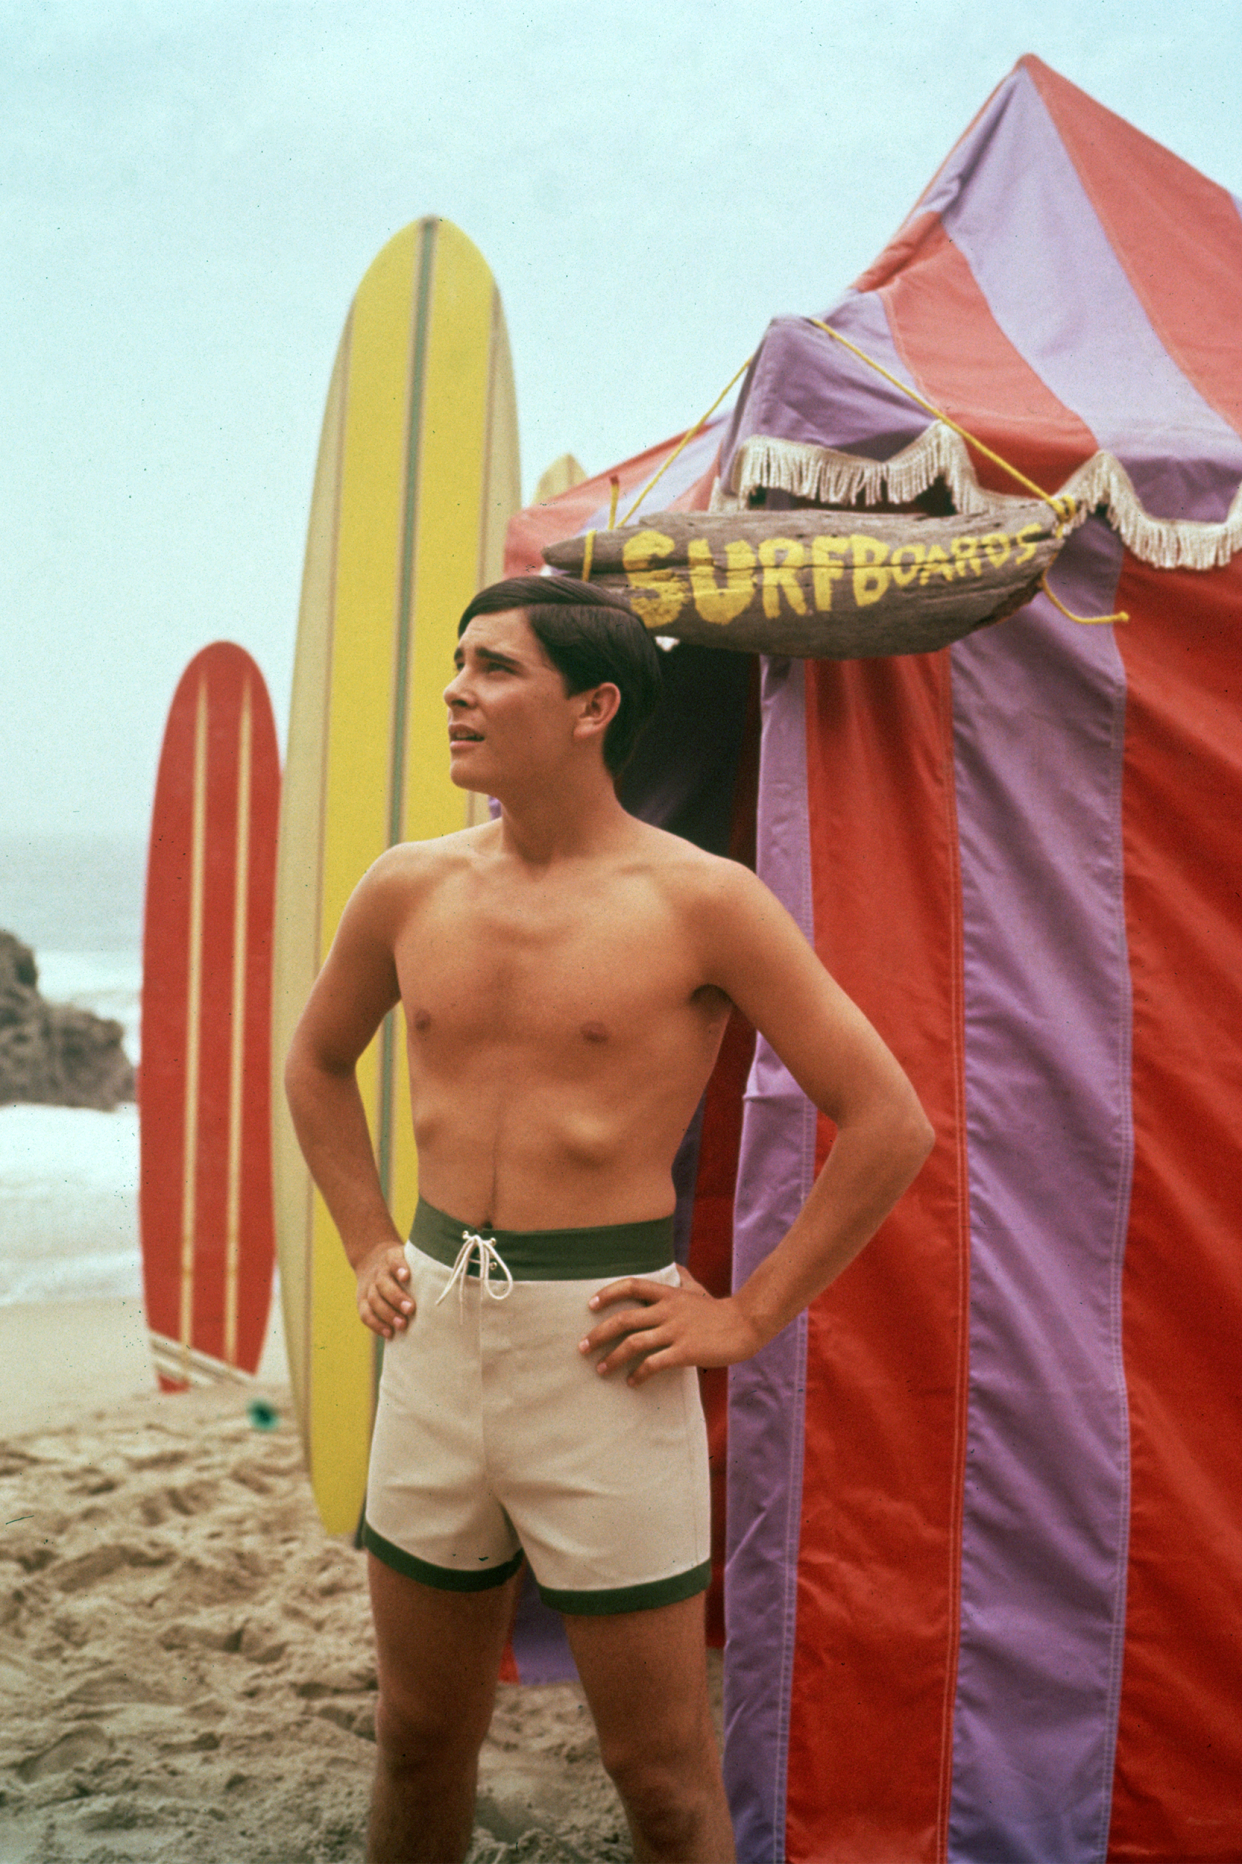 A man wearing swimming trunks standing outside a beach hut with a sign that says, 'Surfboards', with two surfboards sticking out of the sand